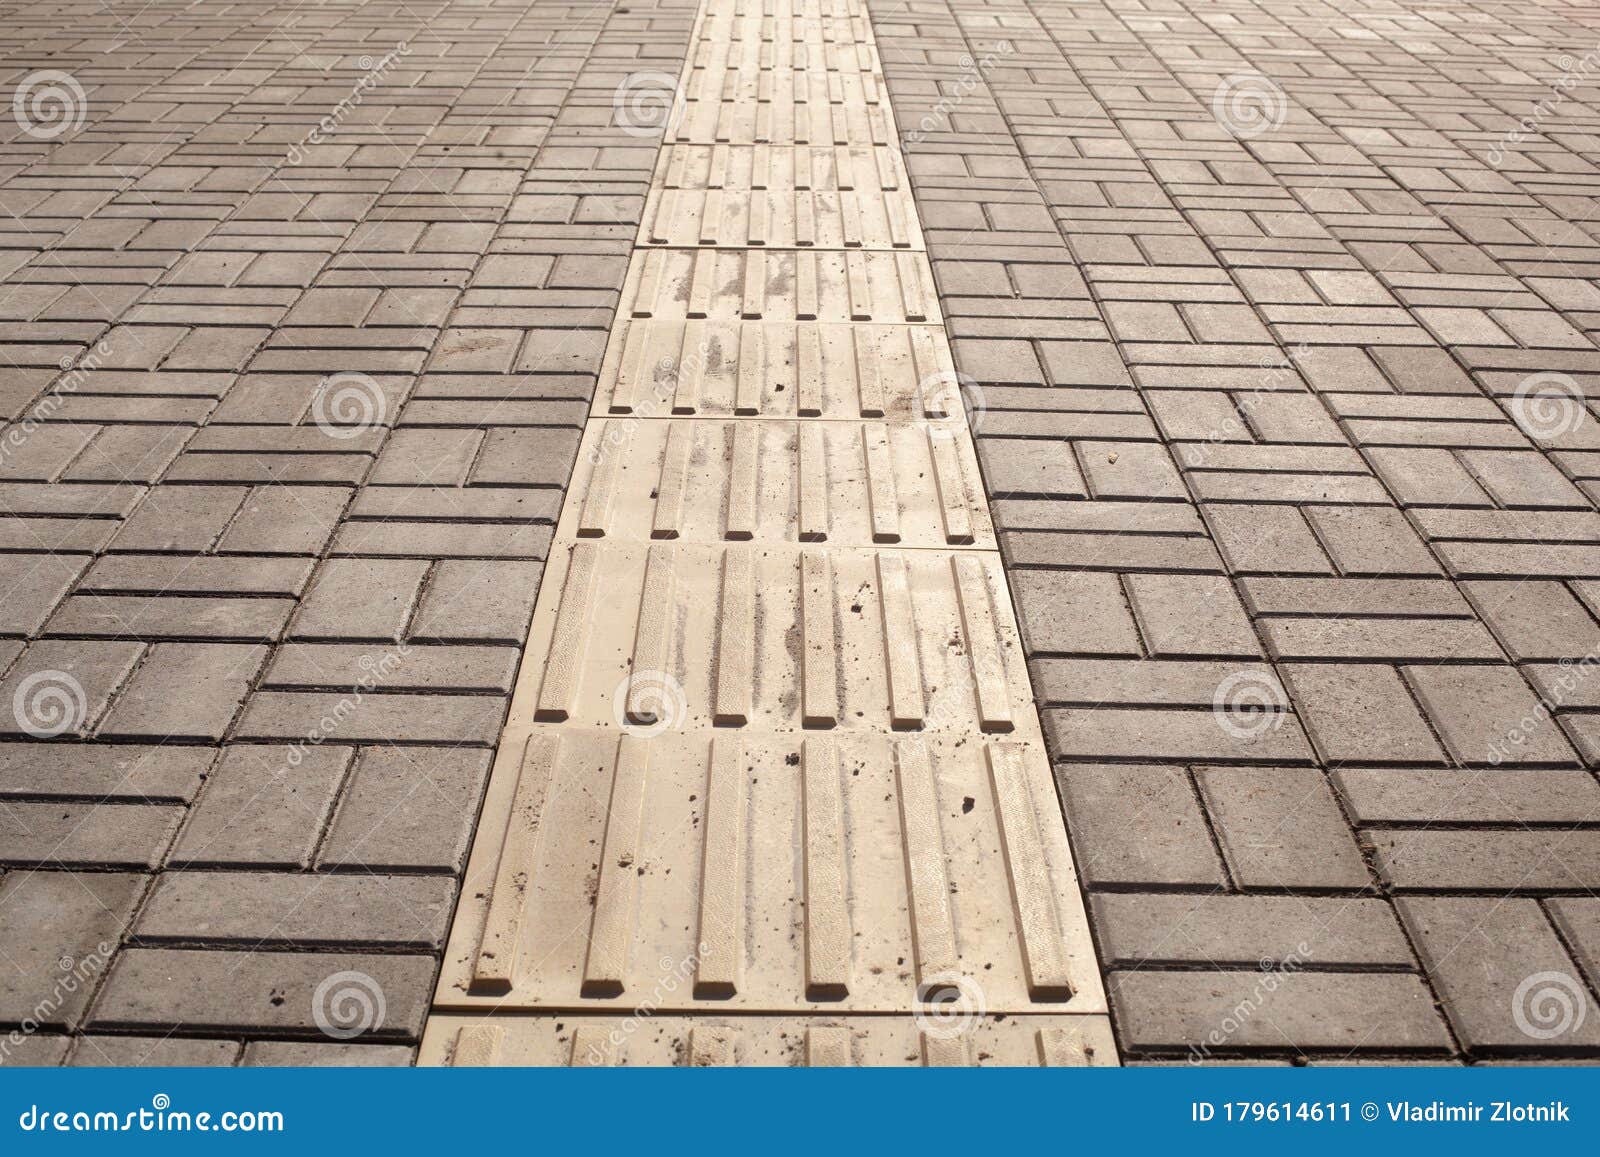 Bright Yellow Tactile Paving for the Visually Impaired Stock Image ...